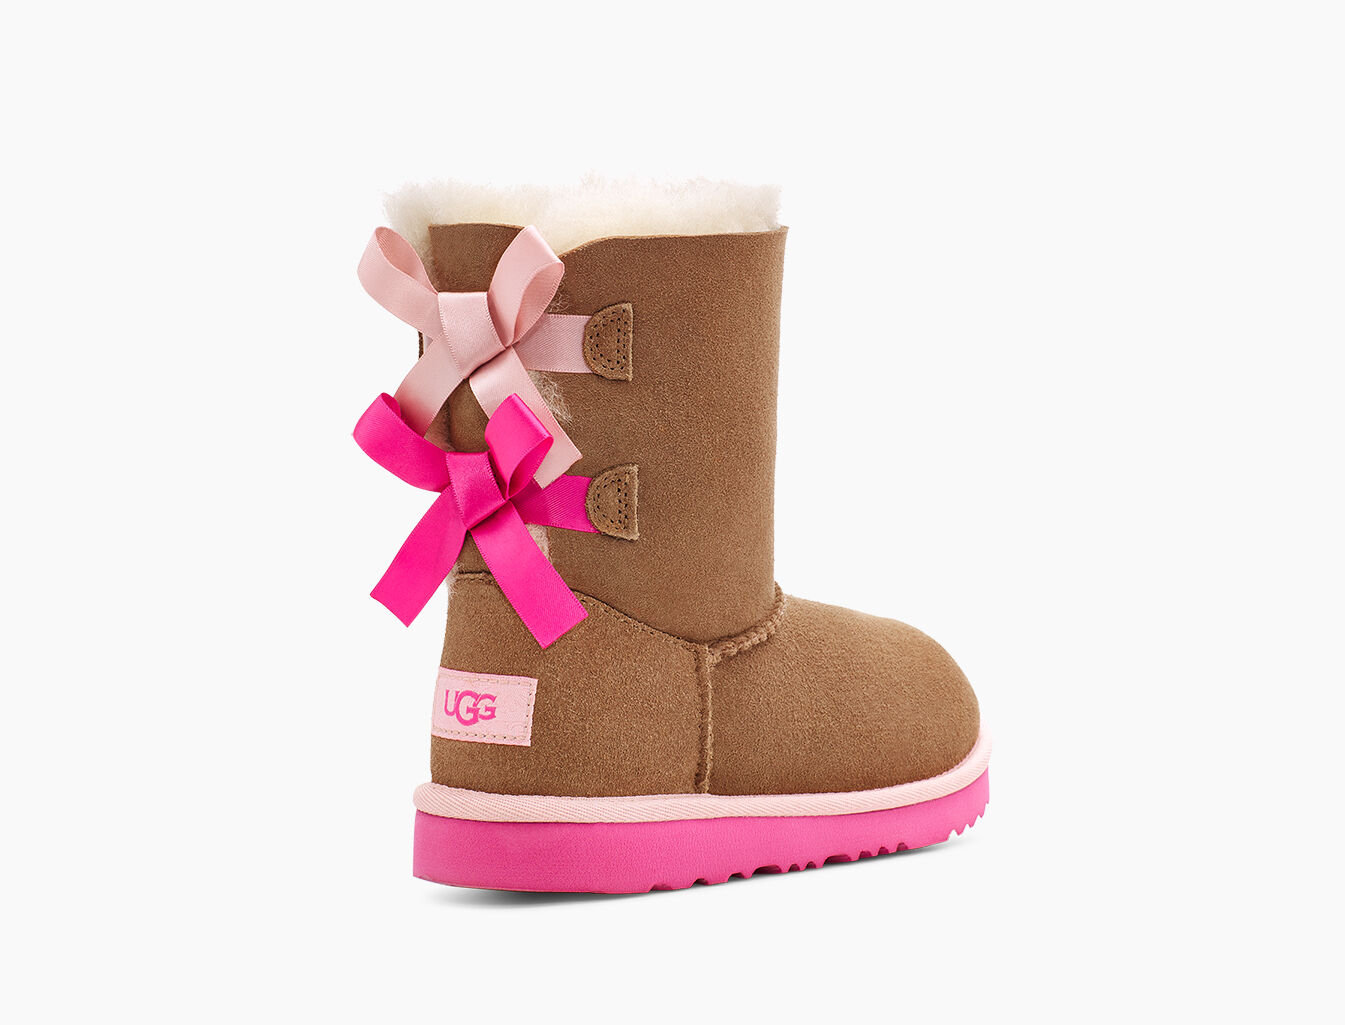 bailey bow uggs size 5